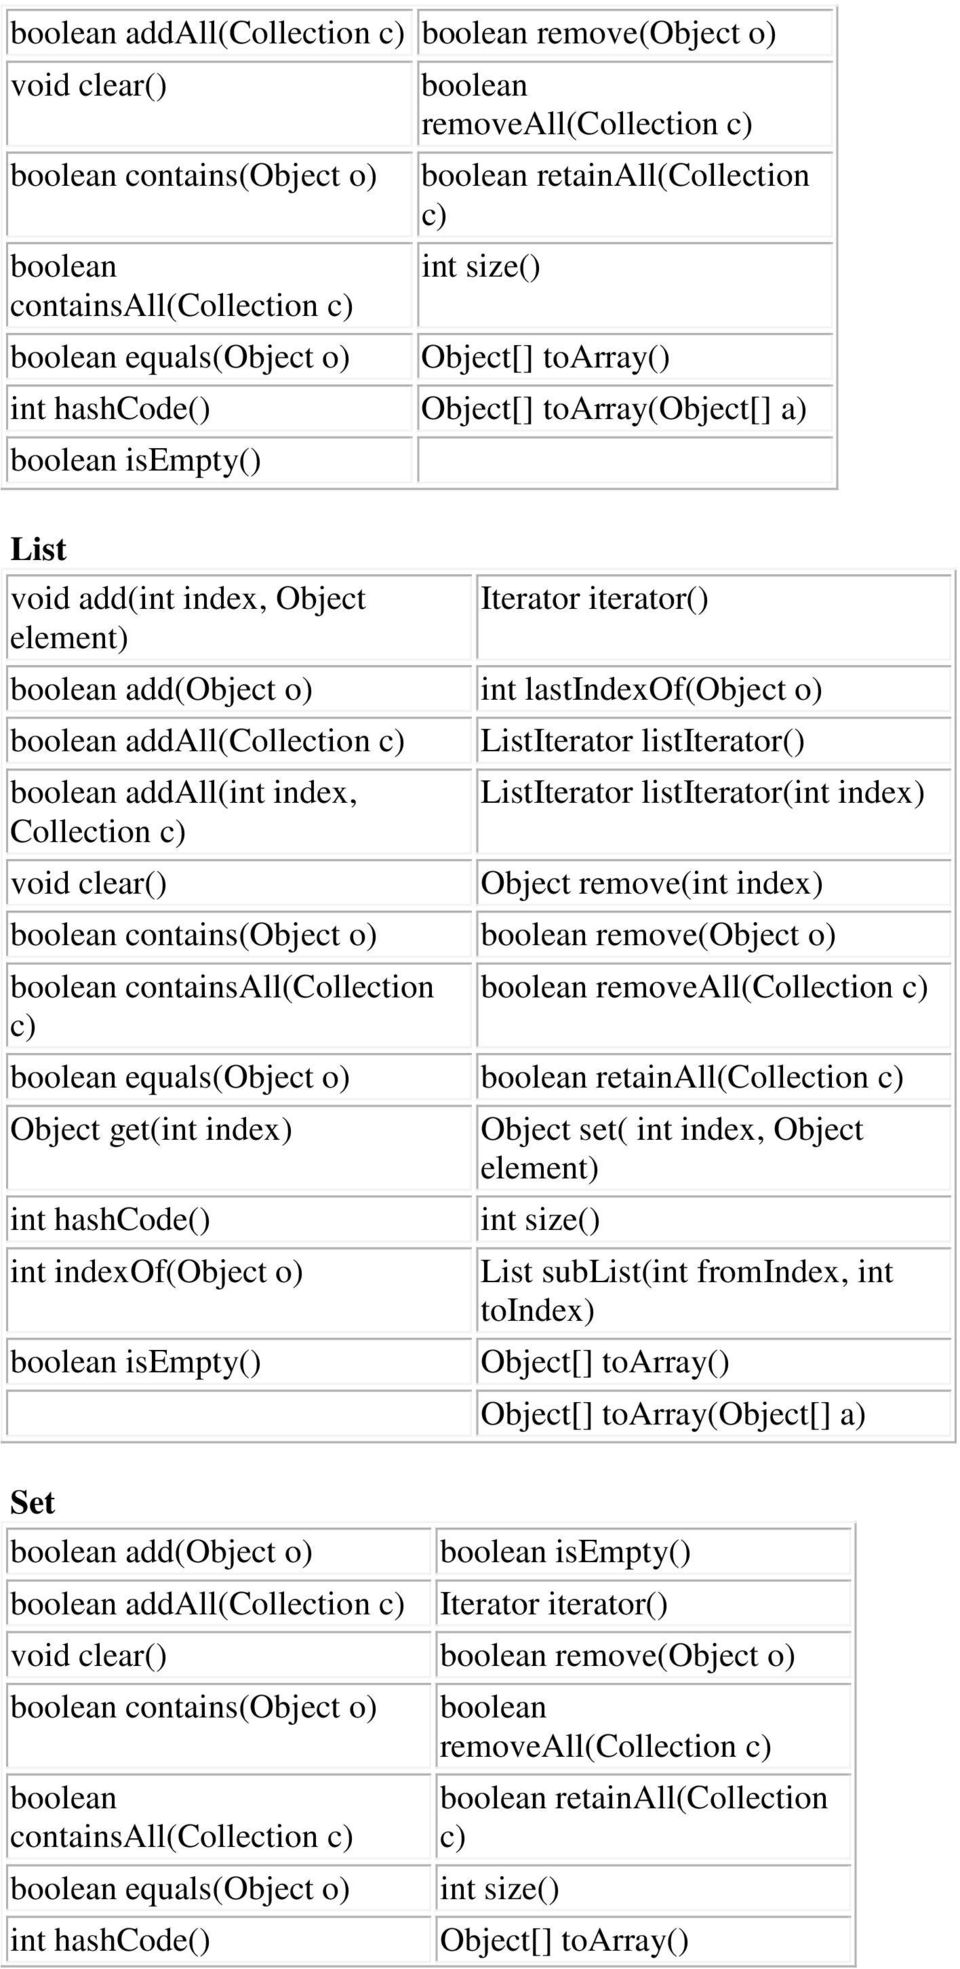 ListIterator listiterator() ListIterator listiterator(int index) Object remove(int index) contains(object o) remove(object o) containsall(collection c) removeall(collection c) equals(object o)